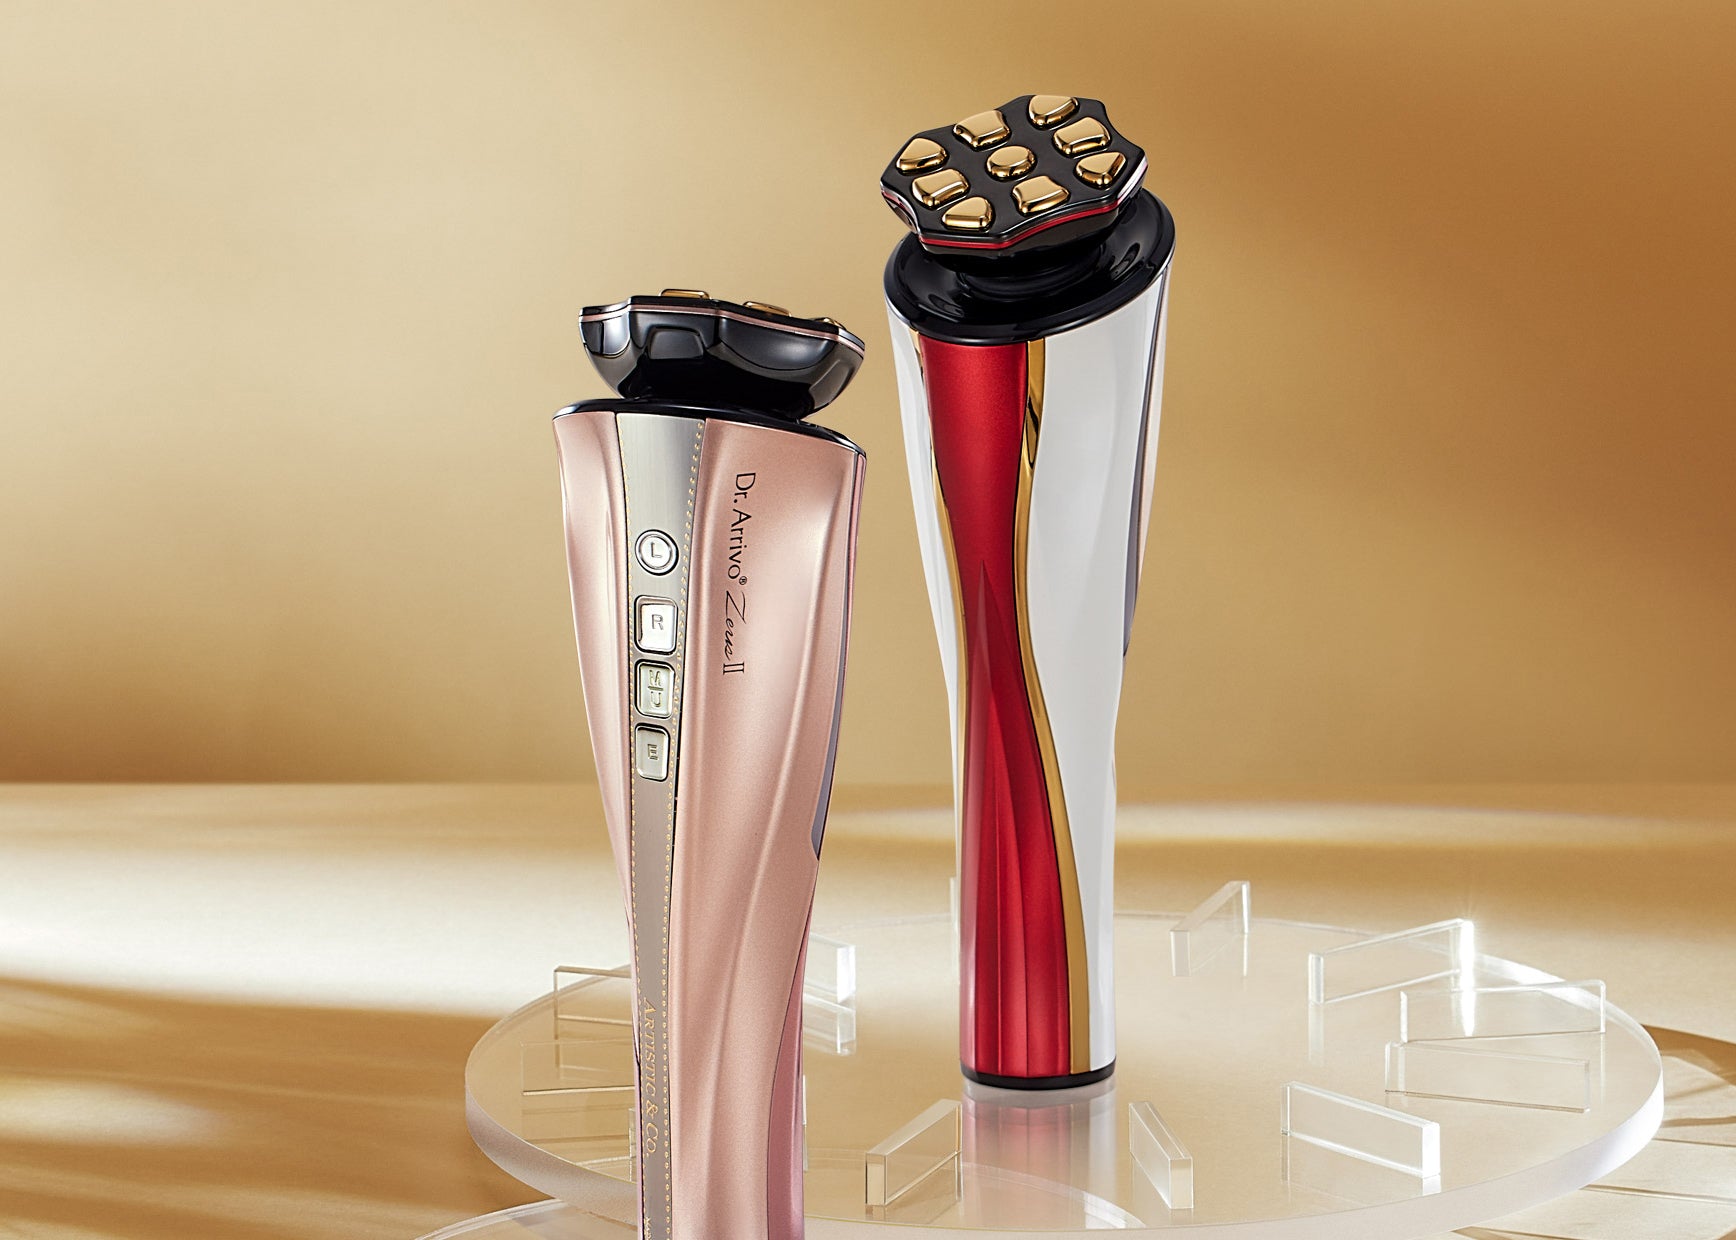 The Dr. Arrivo Zeus II Beauty Device: Med-Spa Technology for At-Home Skincare